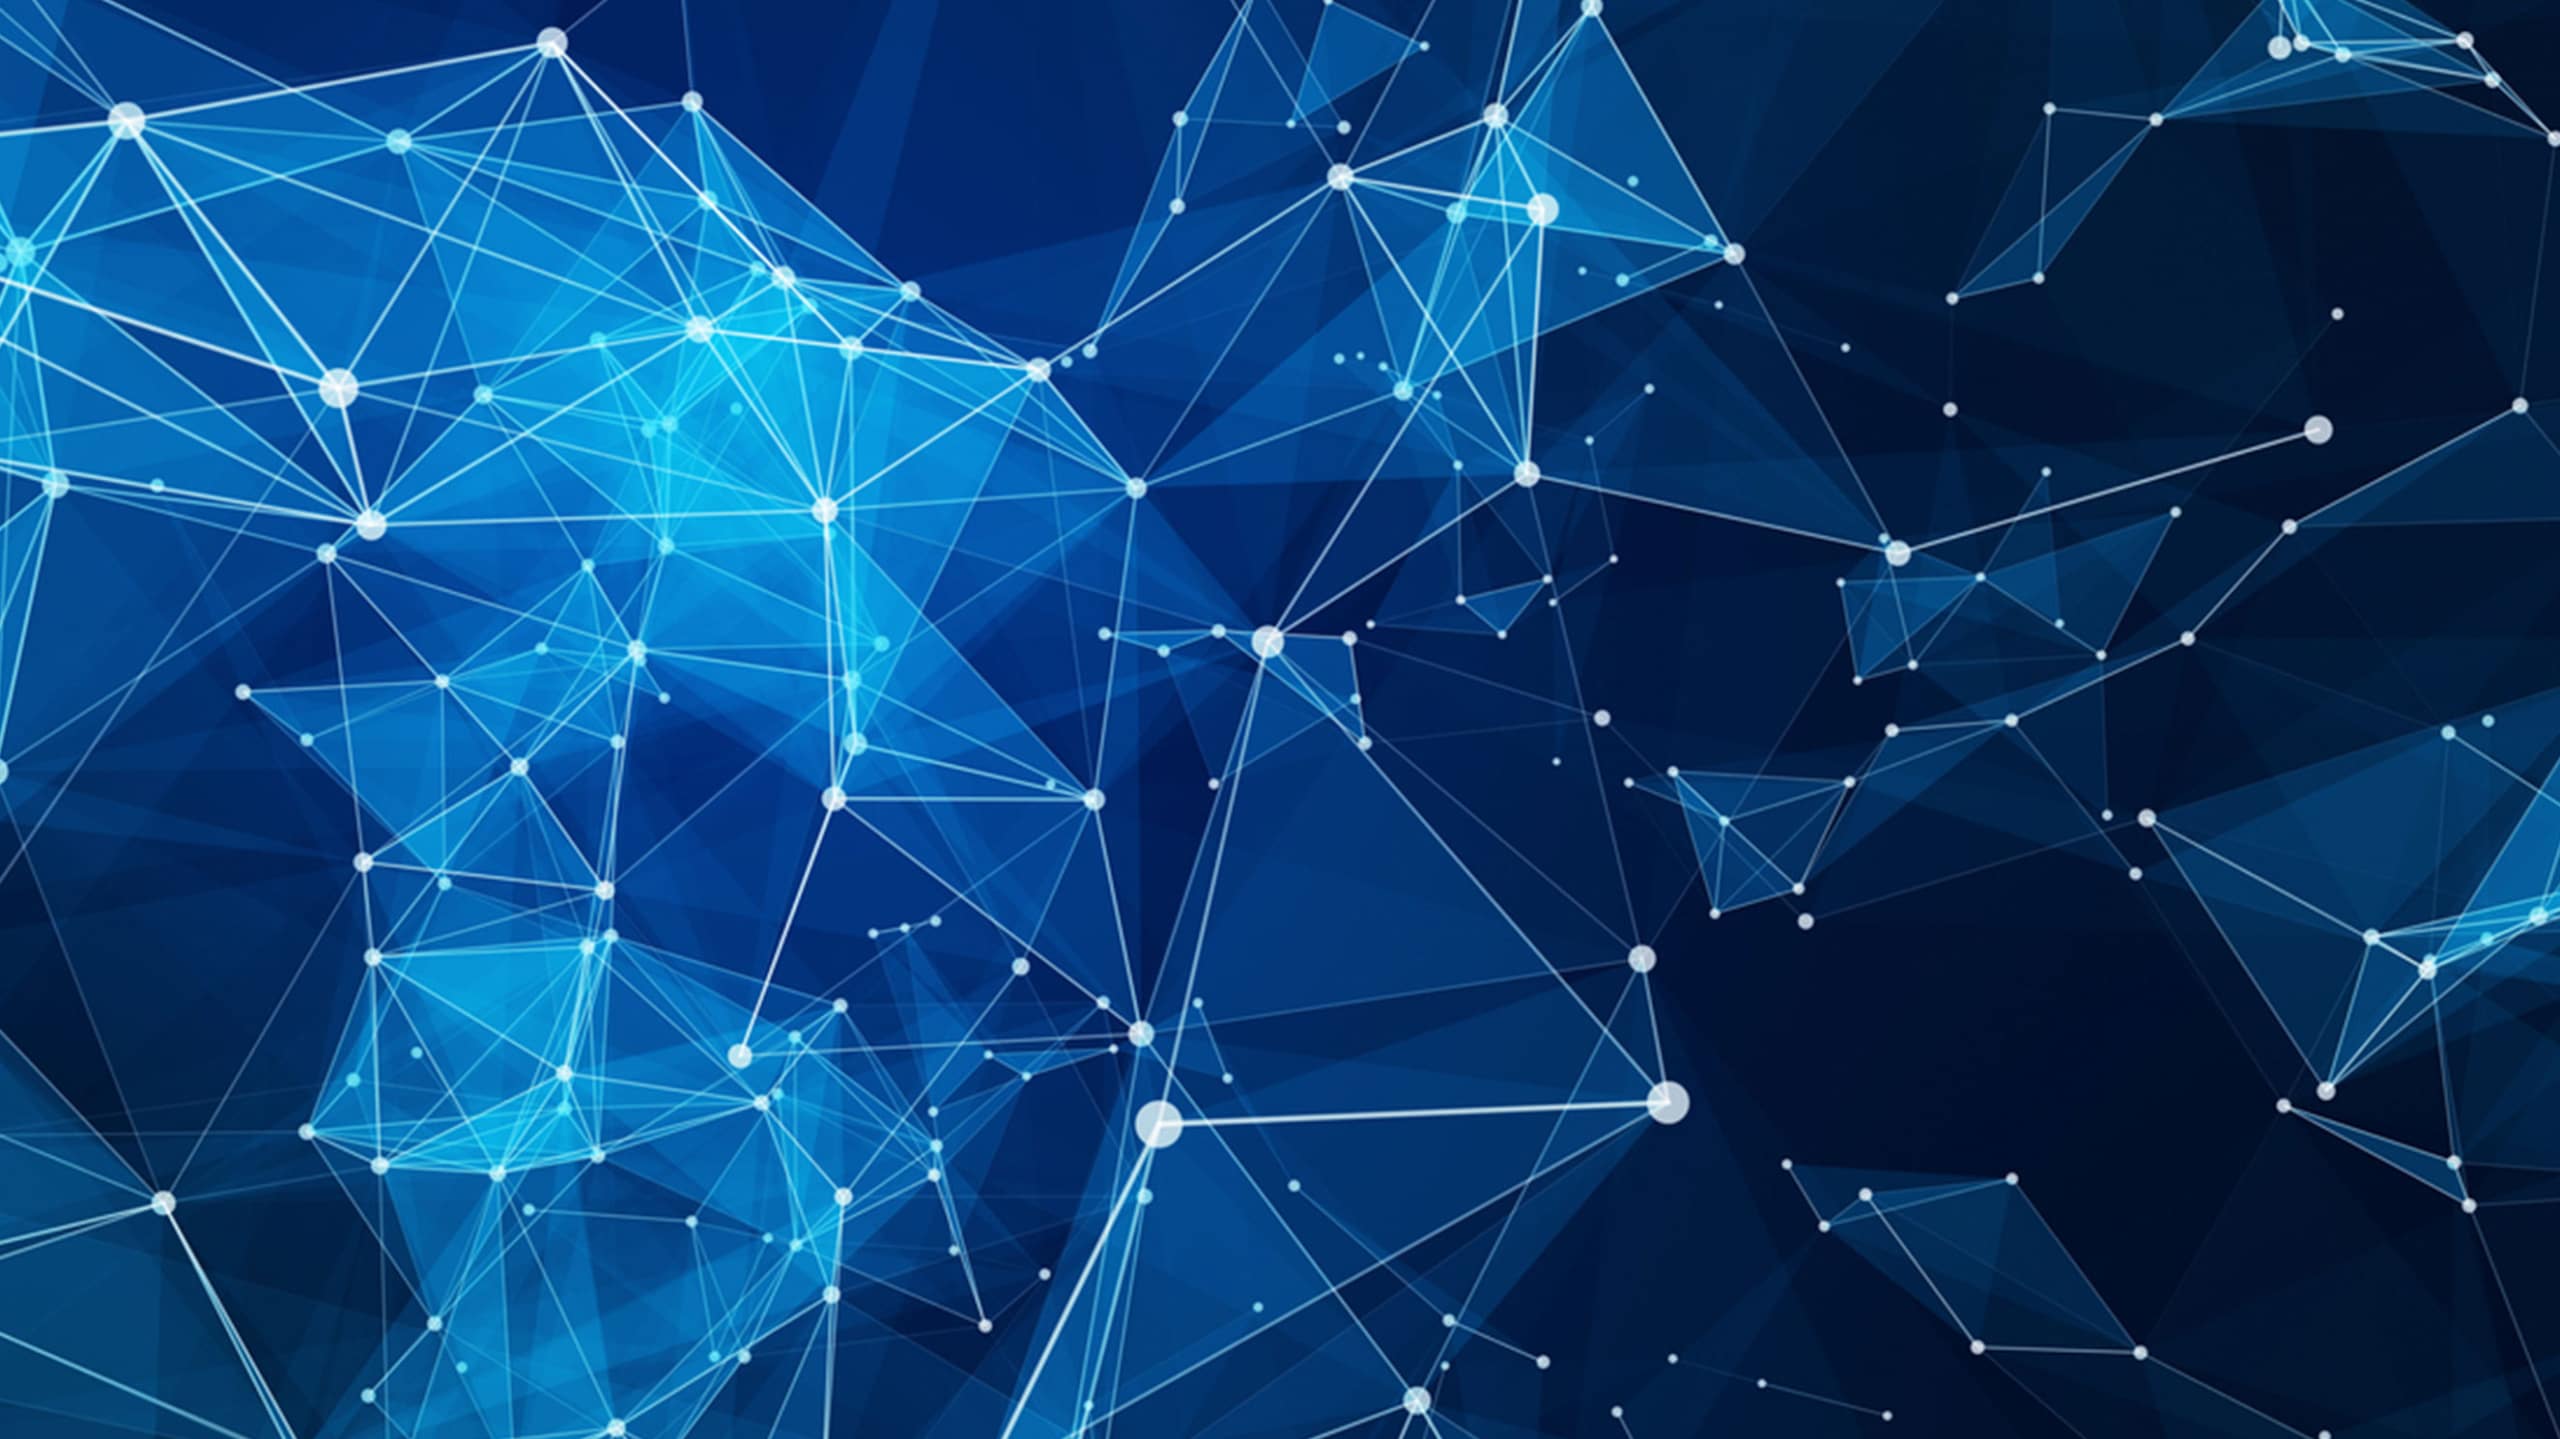 Abstract digital background featuring a network of interconnected white dots and lines on a deep blue background, illustrating concepts of connectivity and technology in thwarting state-sponsored threats.